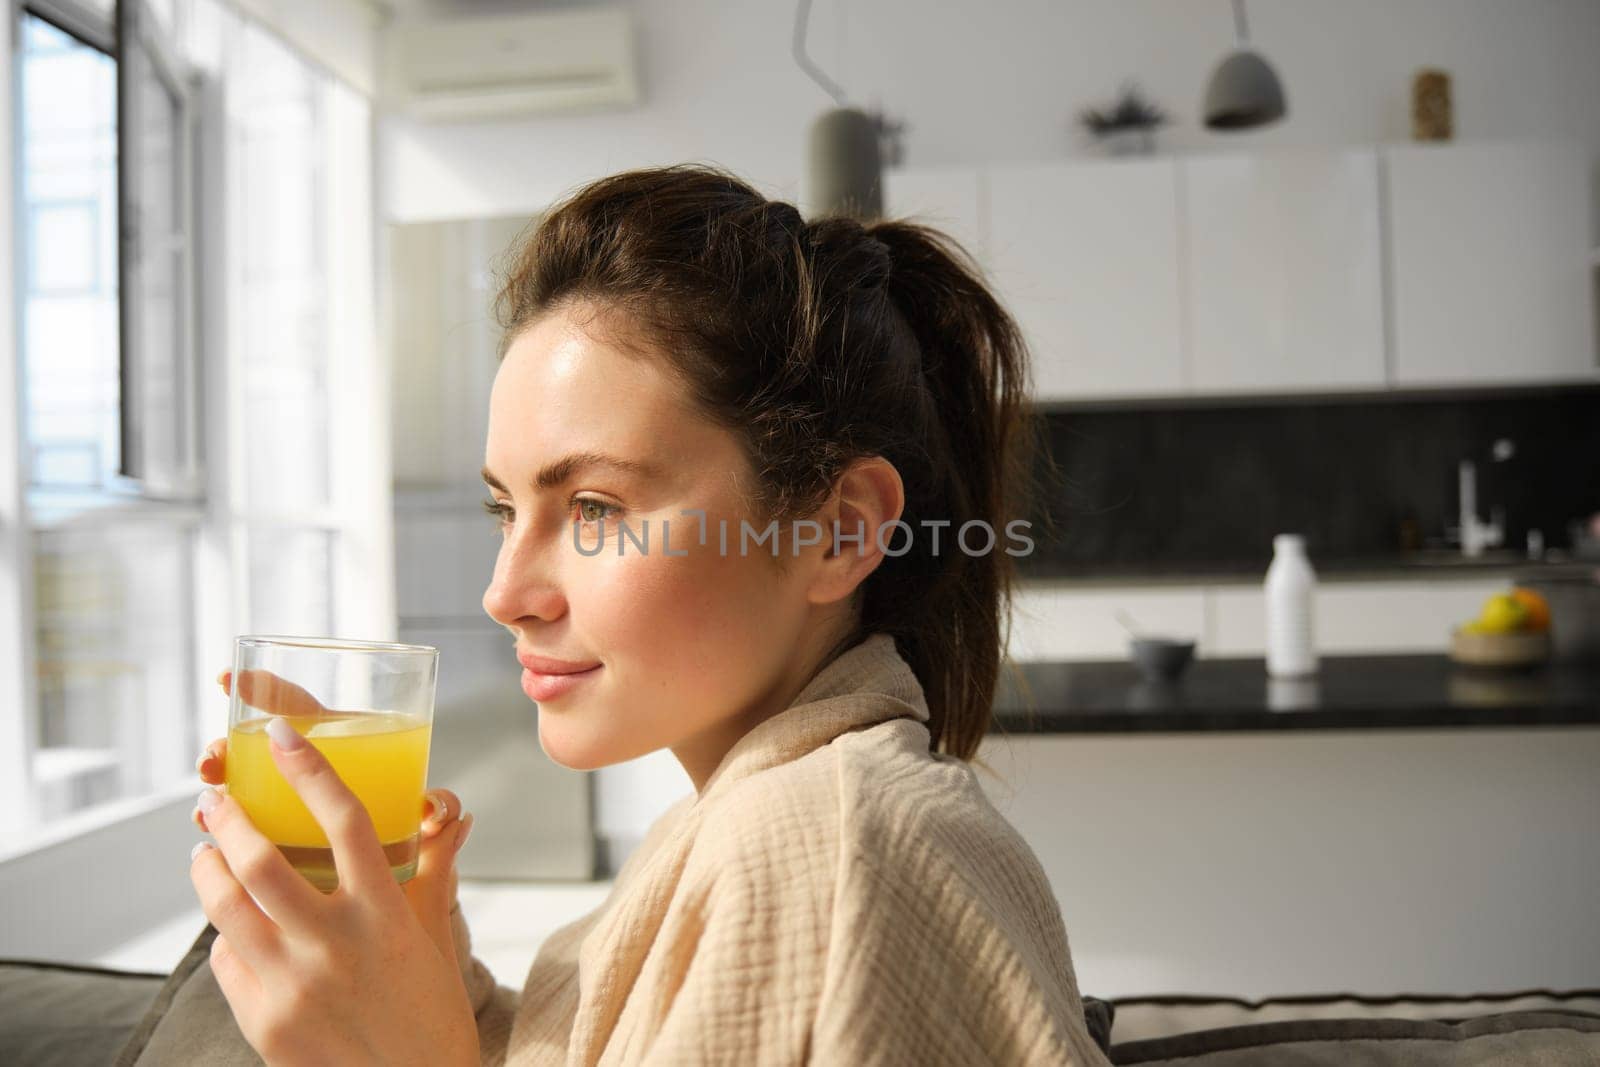 Portrait of gorgeous, modern young woman wakes up in morning, has her fresh glass of orange juice, looks outside window, relaxing in bathrobe at home.